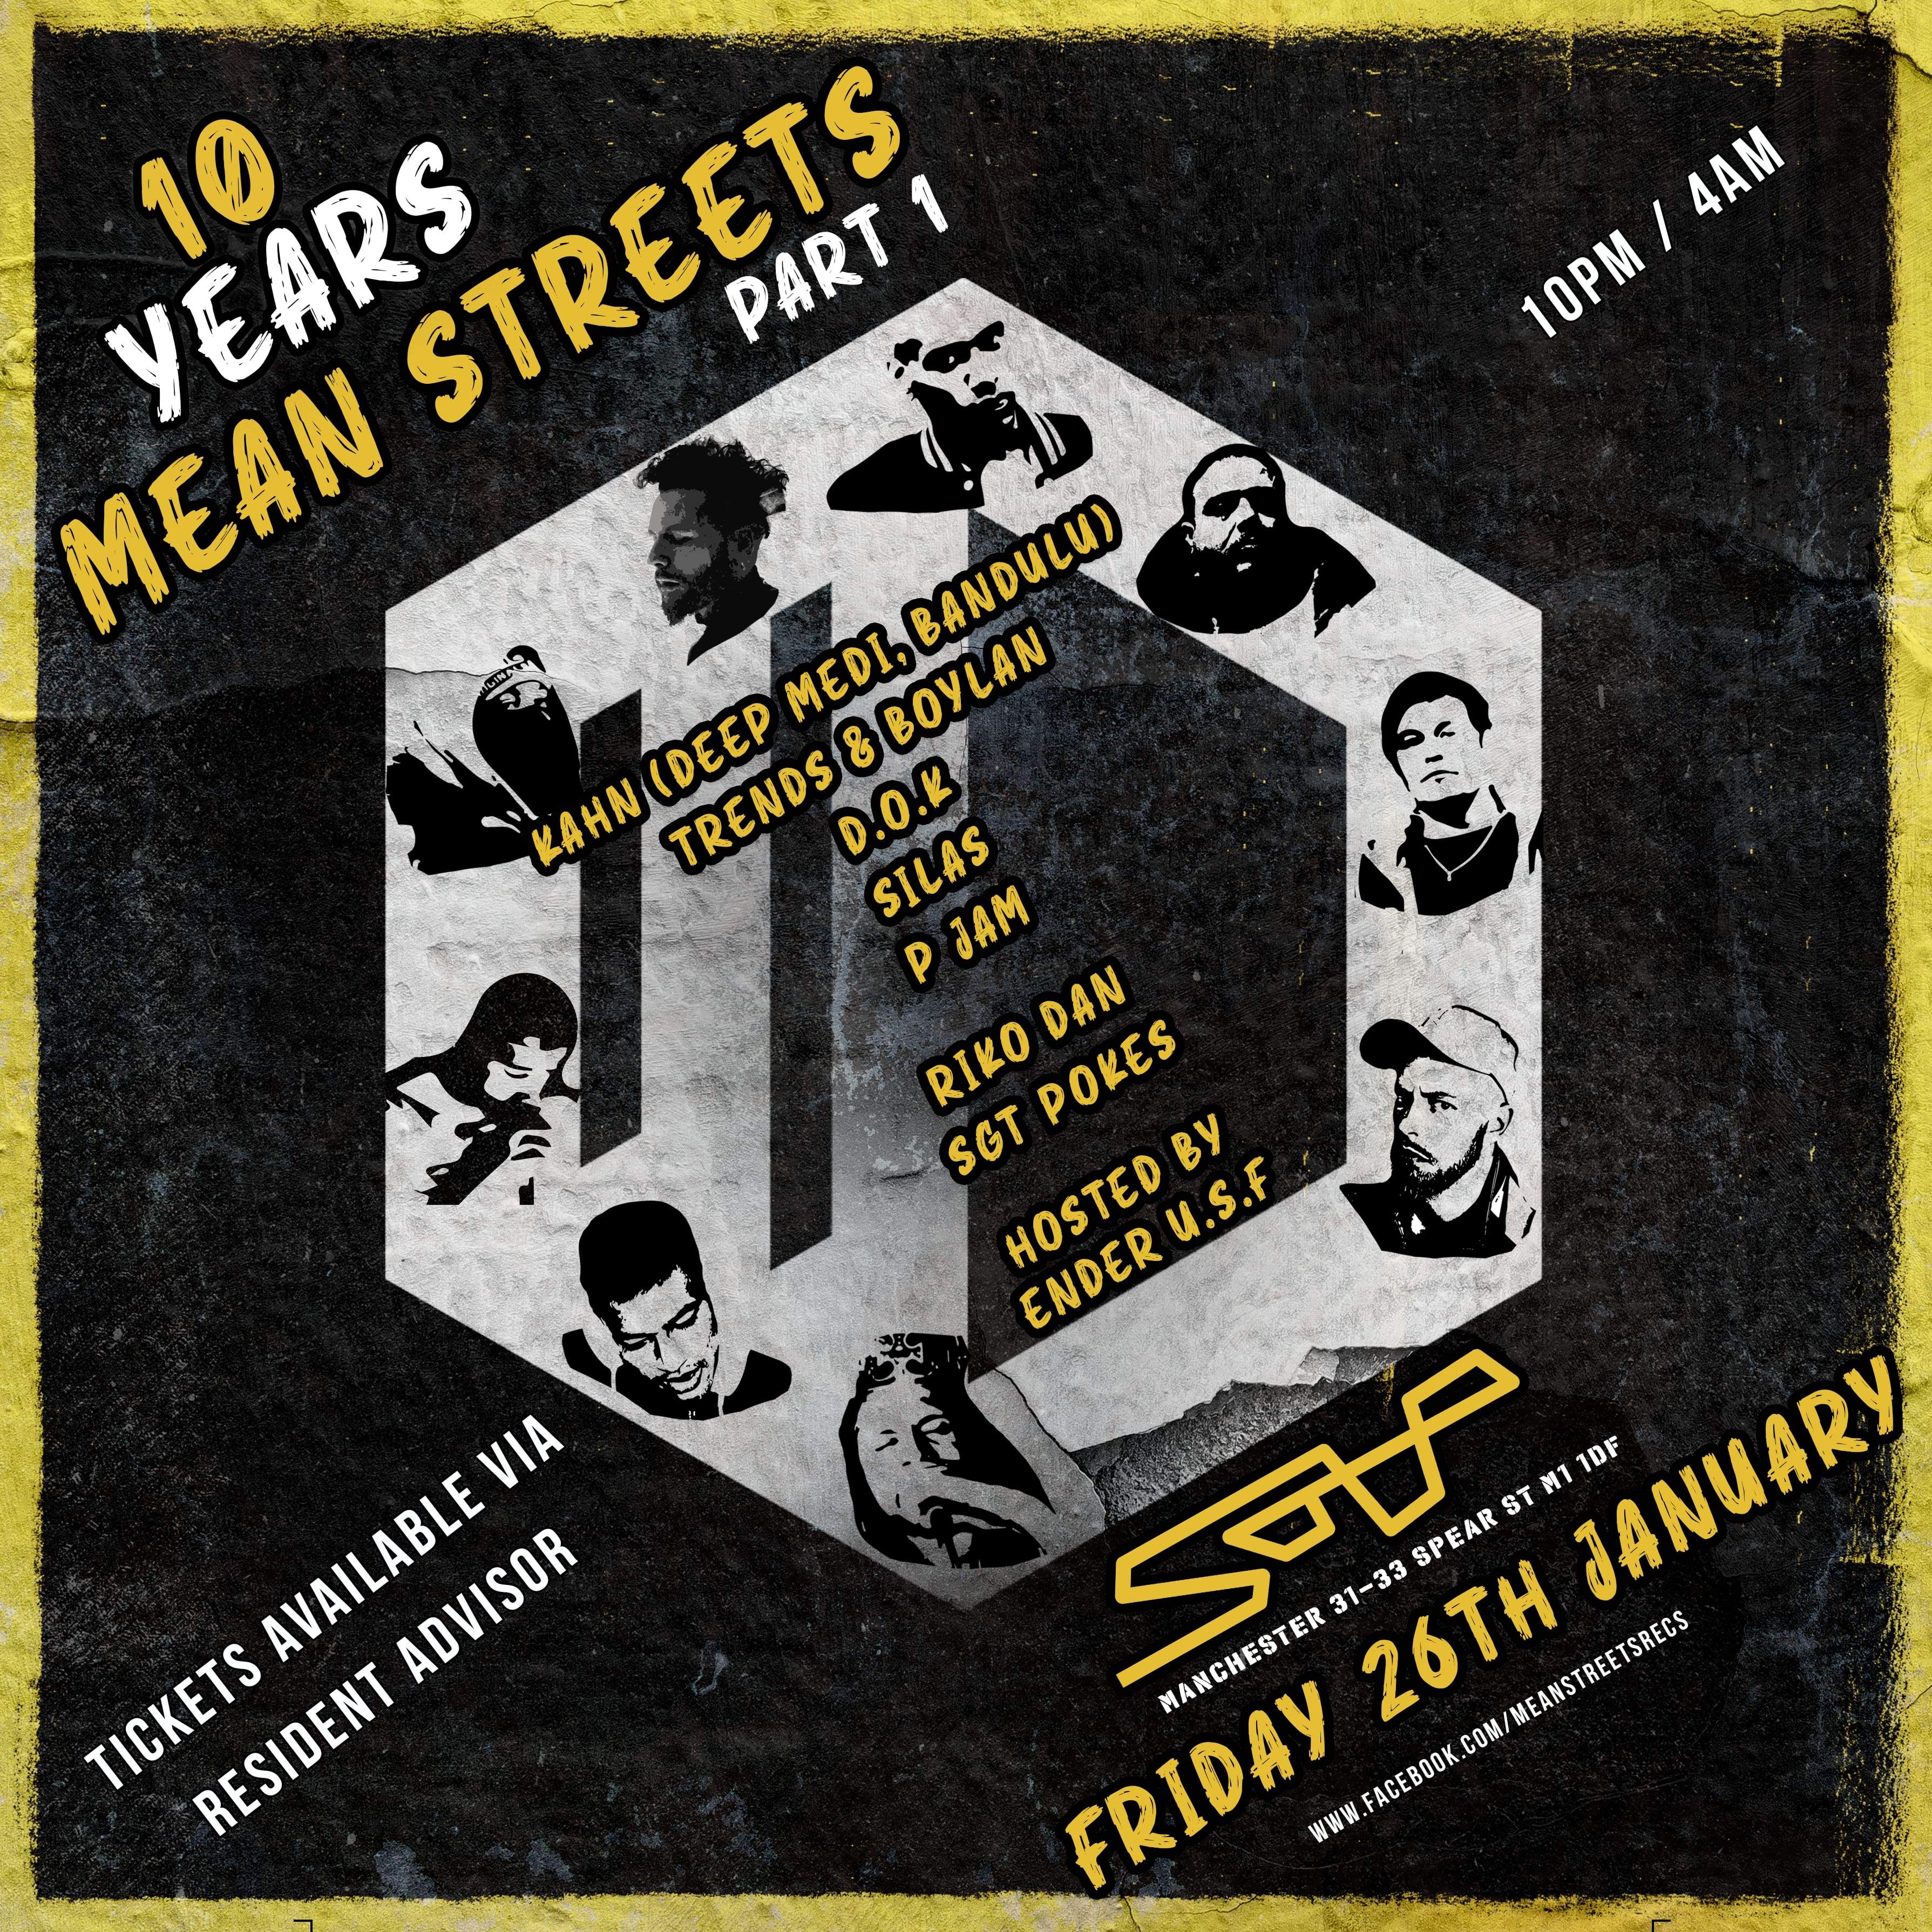 10 years of Mean Streets Recs (part 1) - フライヤー表